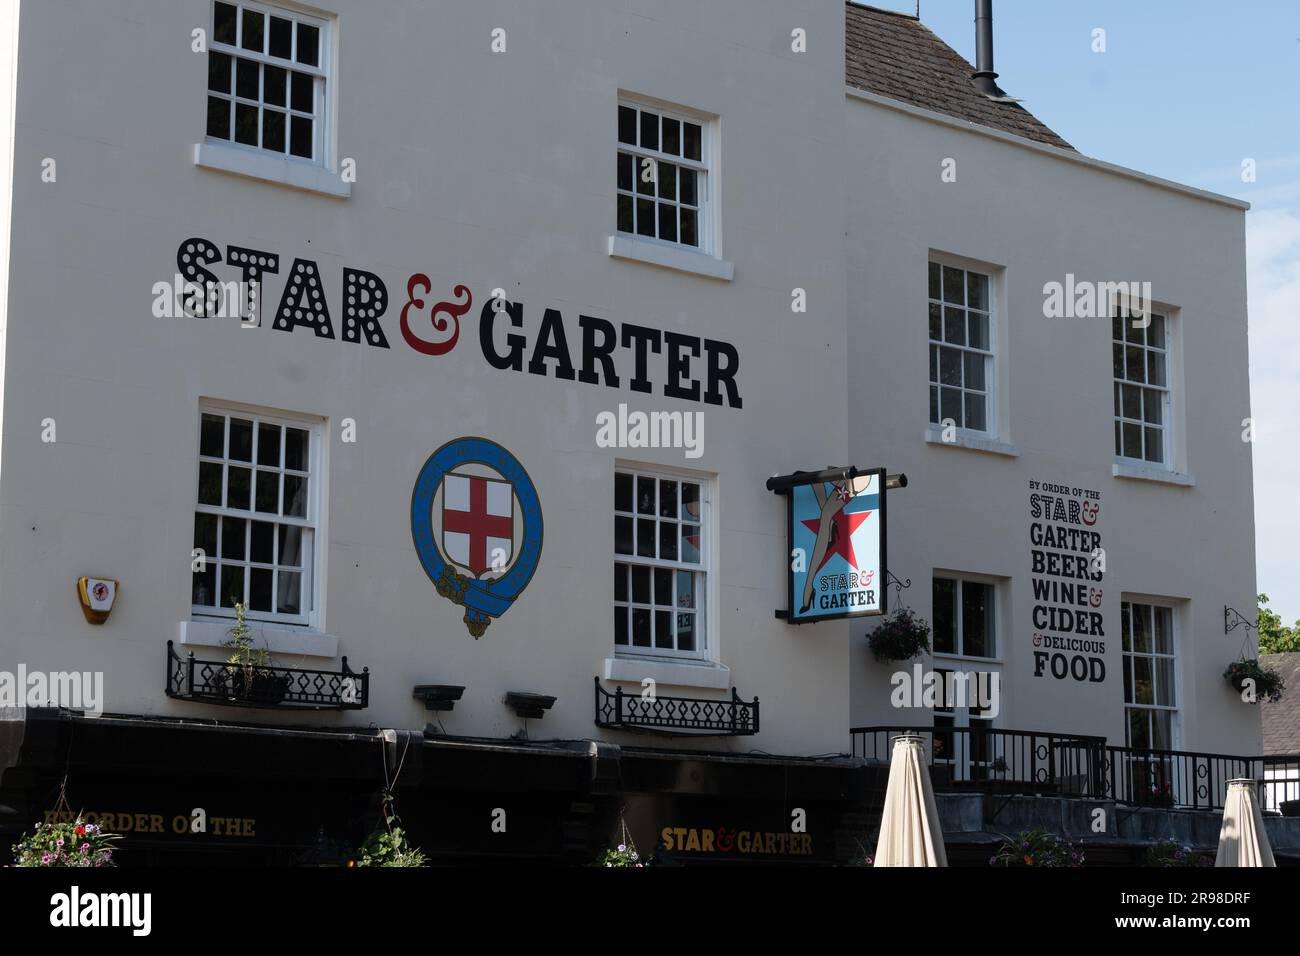 The Star and Garter pub, Leamington Spa, Warwickshire, Angleterre, Royaume-Uni Banque D'Images